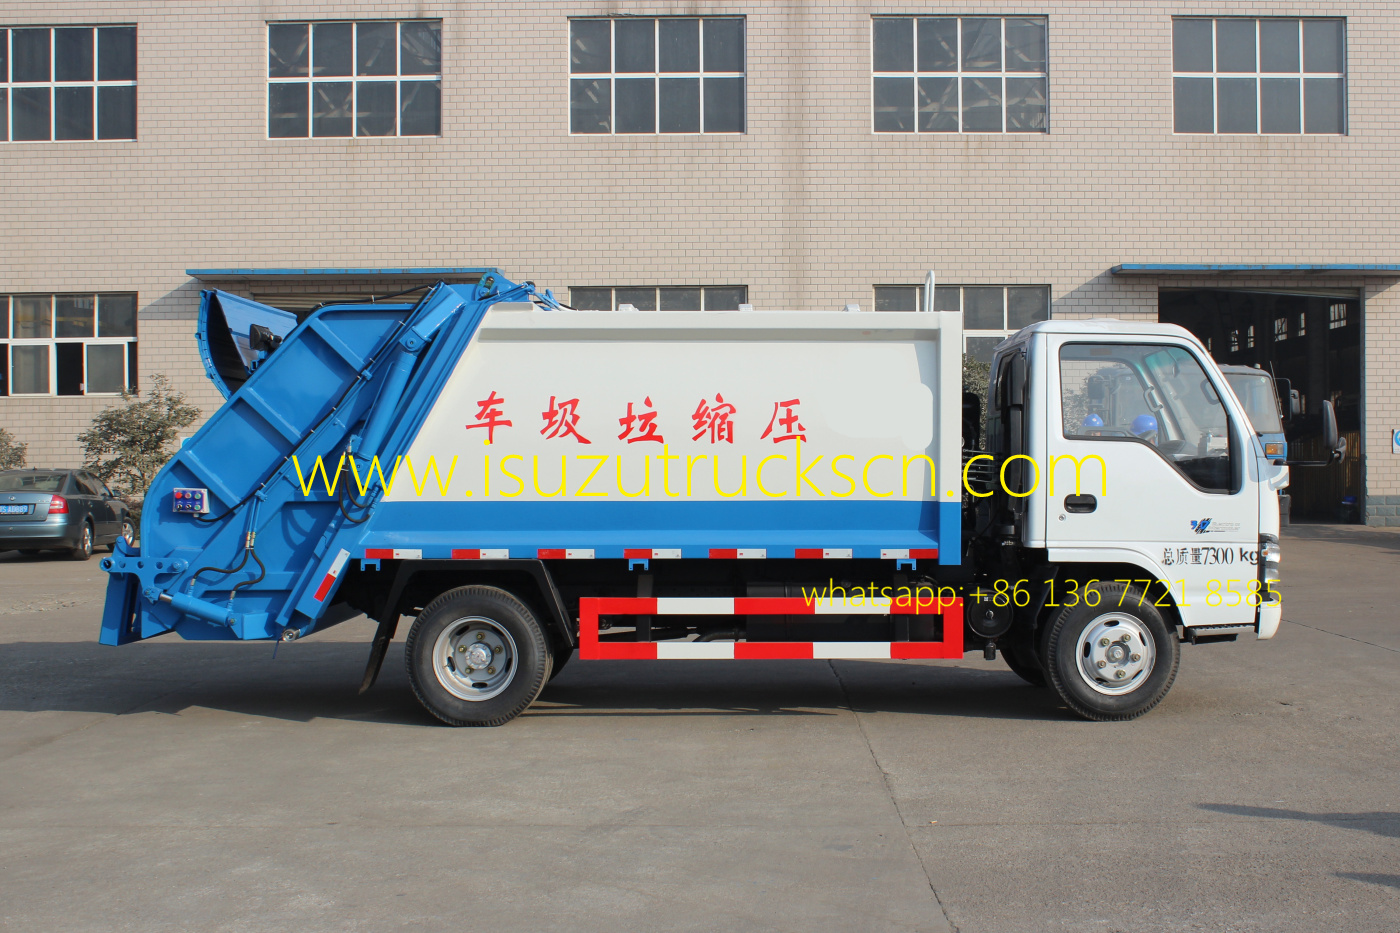 3 Ton Isuzu Garbage Truck With Compactor details pictures